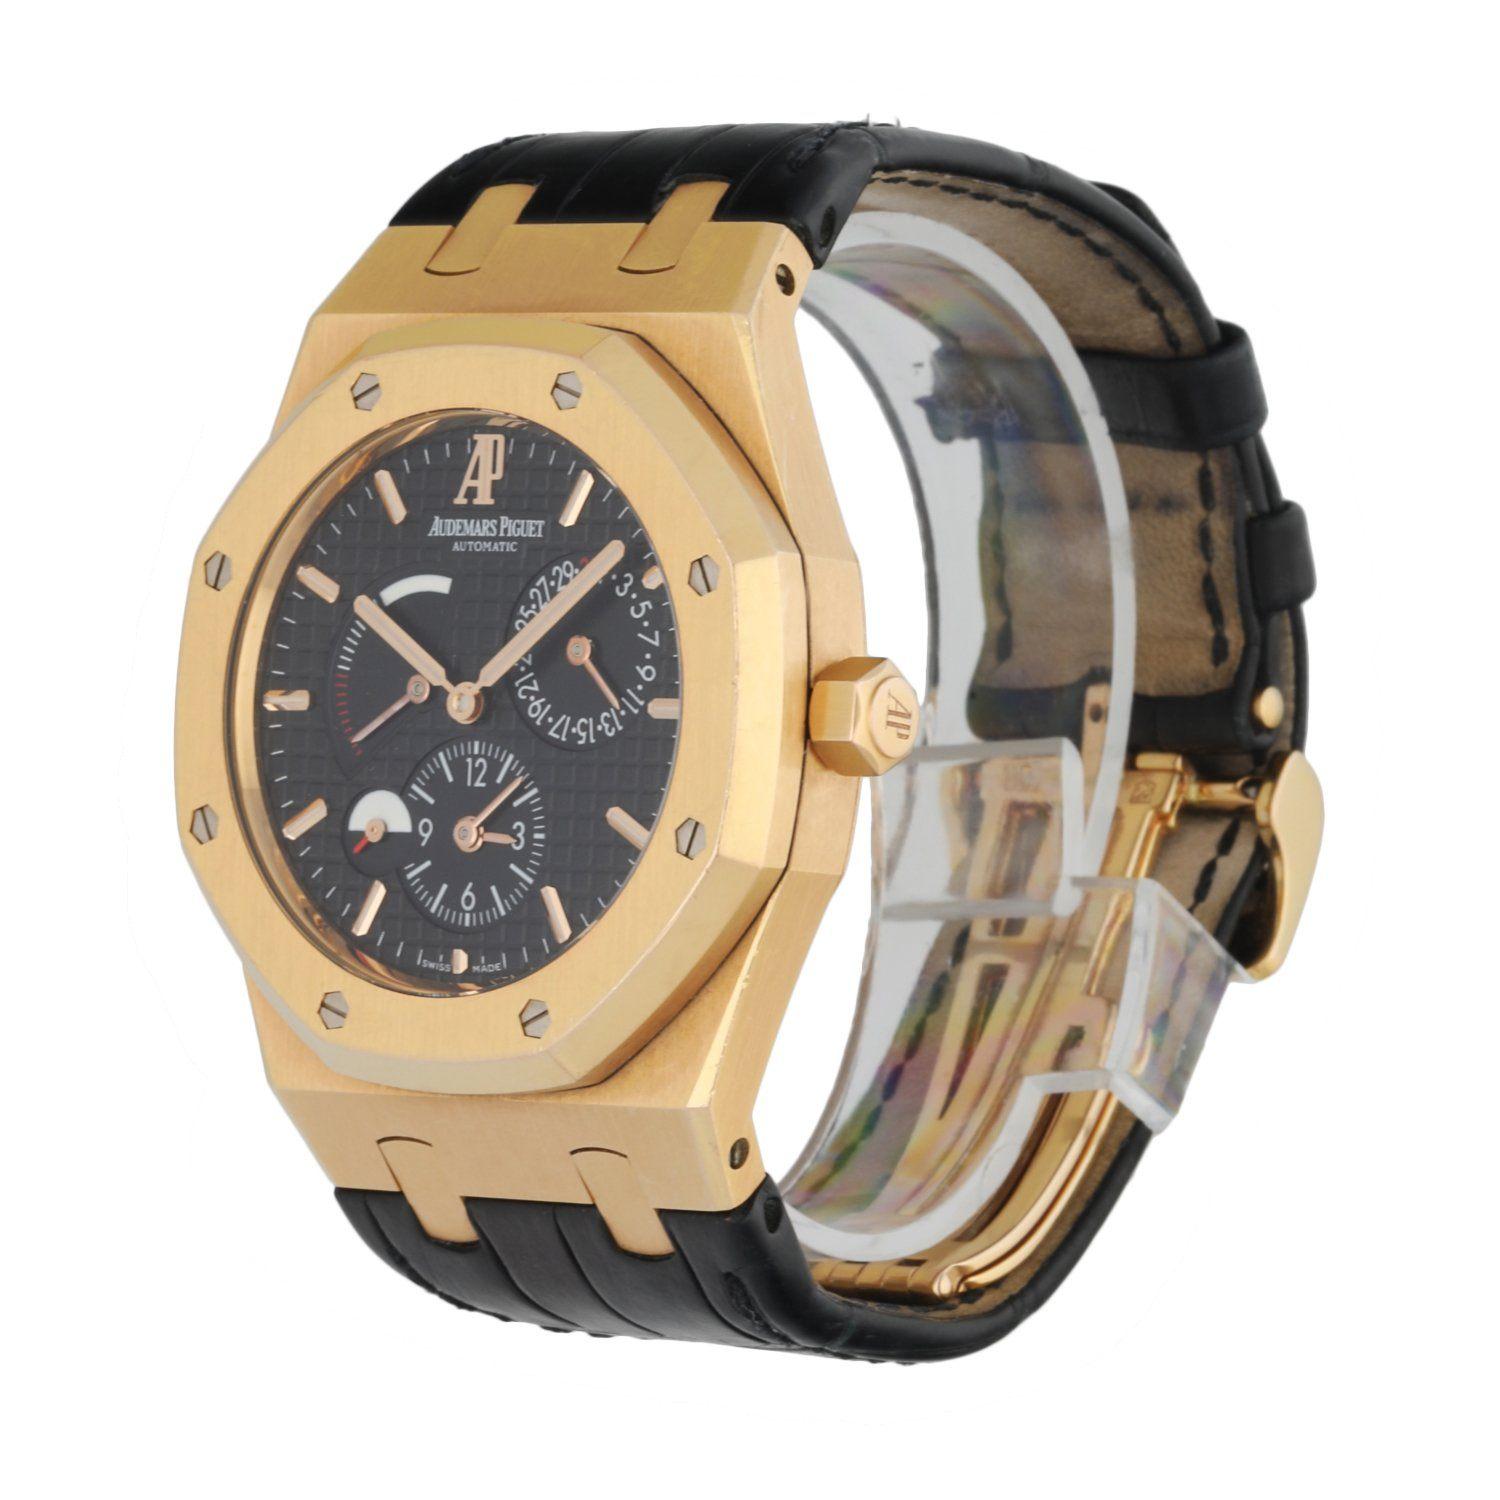 Audemars Piguet Royal Oak Dual Time 26120OR.OO.D088CR.01 men's watch. 39MM 18K rose gold caseÂ with 18K rose gold octagon shape bezel.Â Black Tapestry dial with luminous rose gold hands and index hour markers. Date display between 1 & 3 o'clock